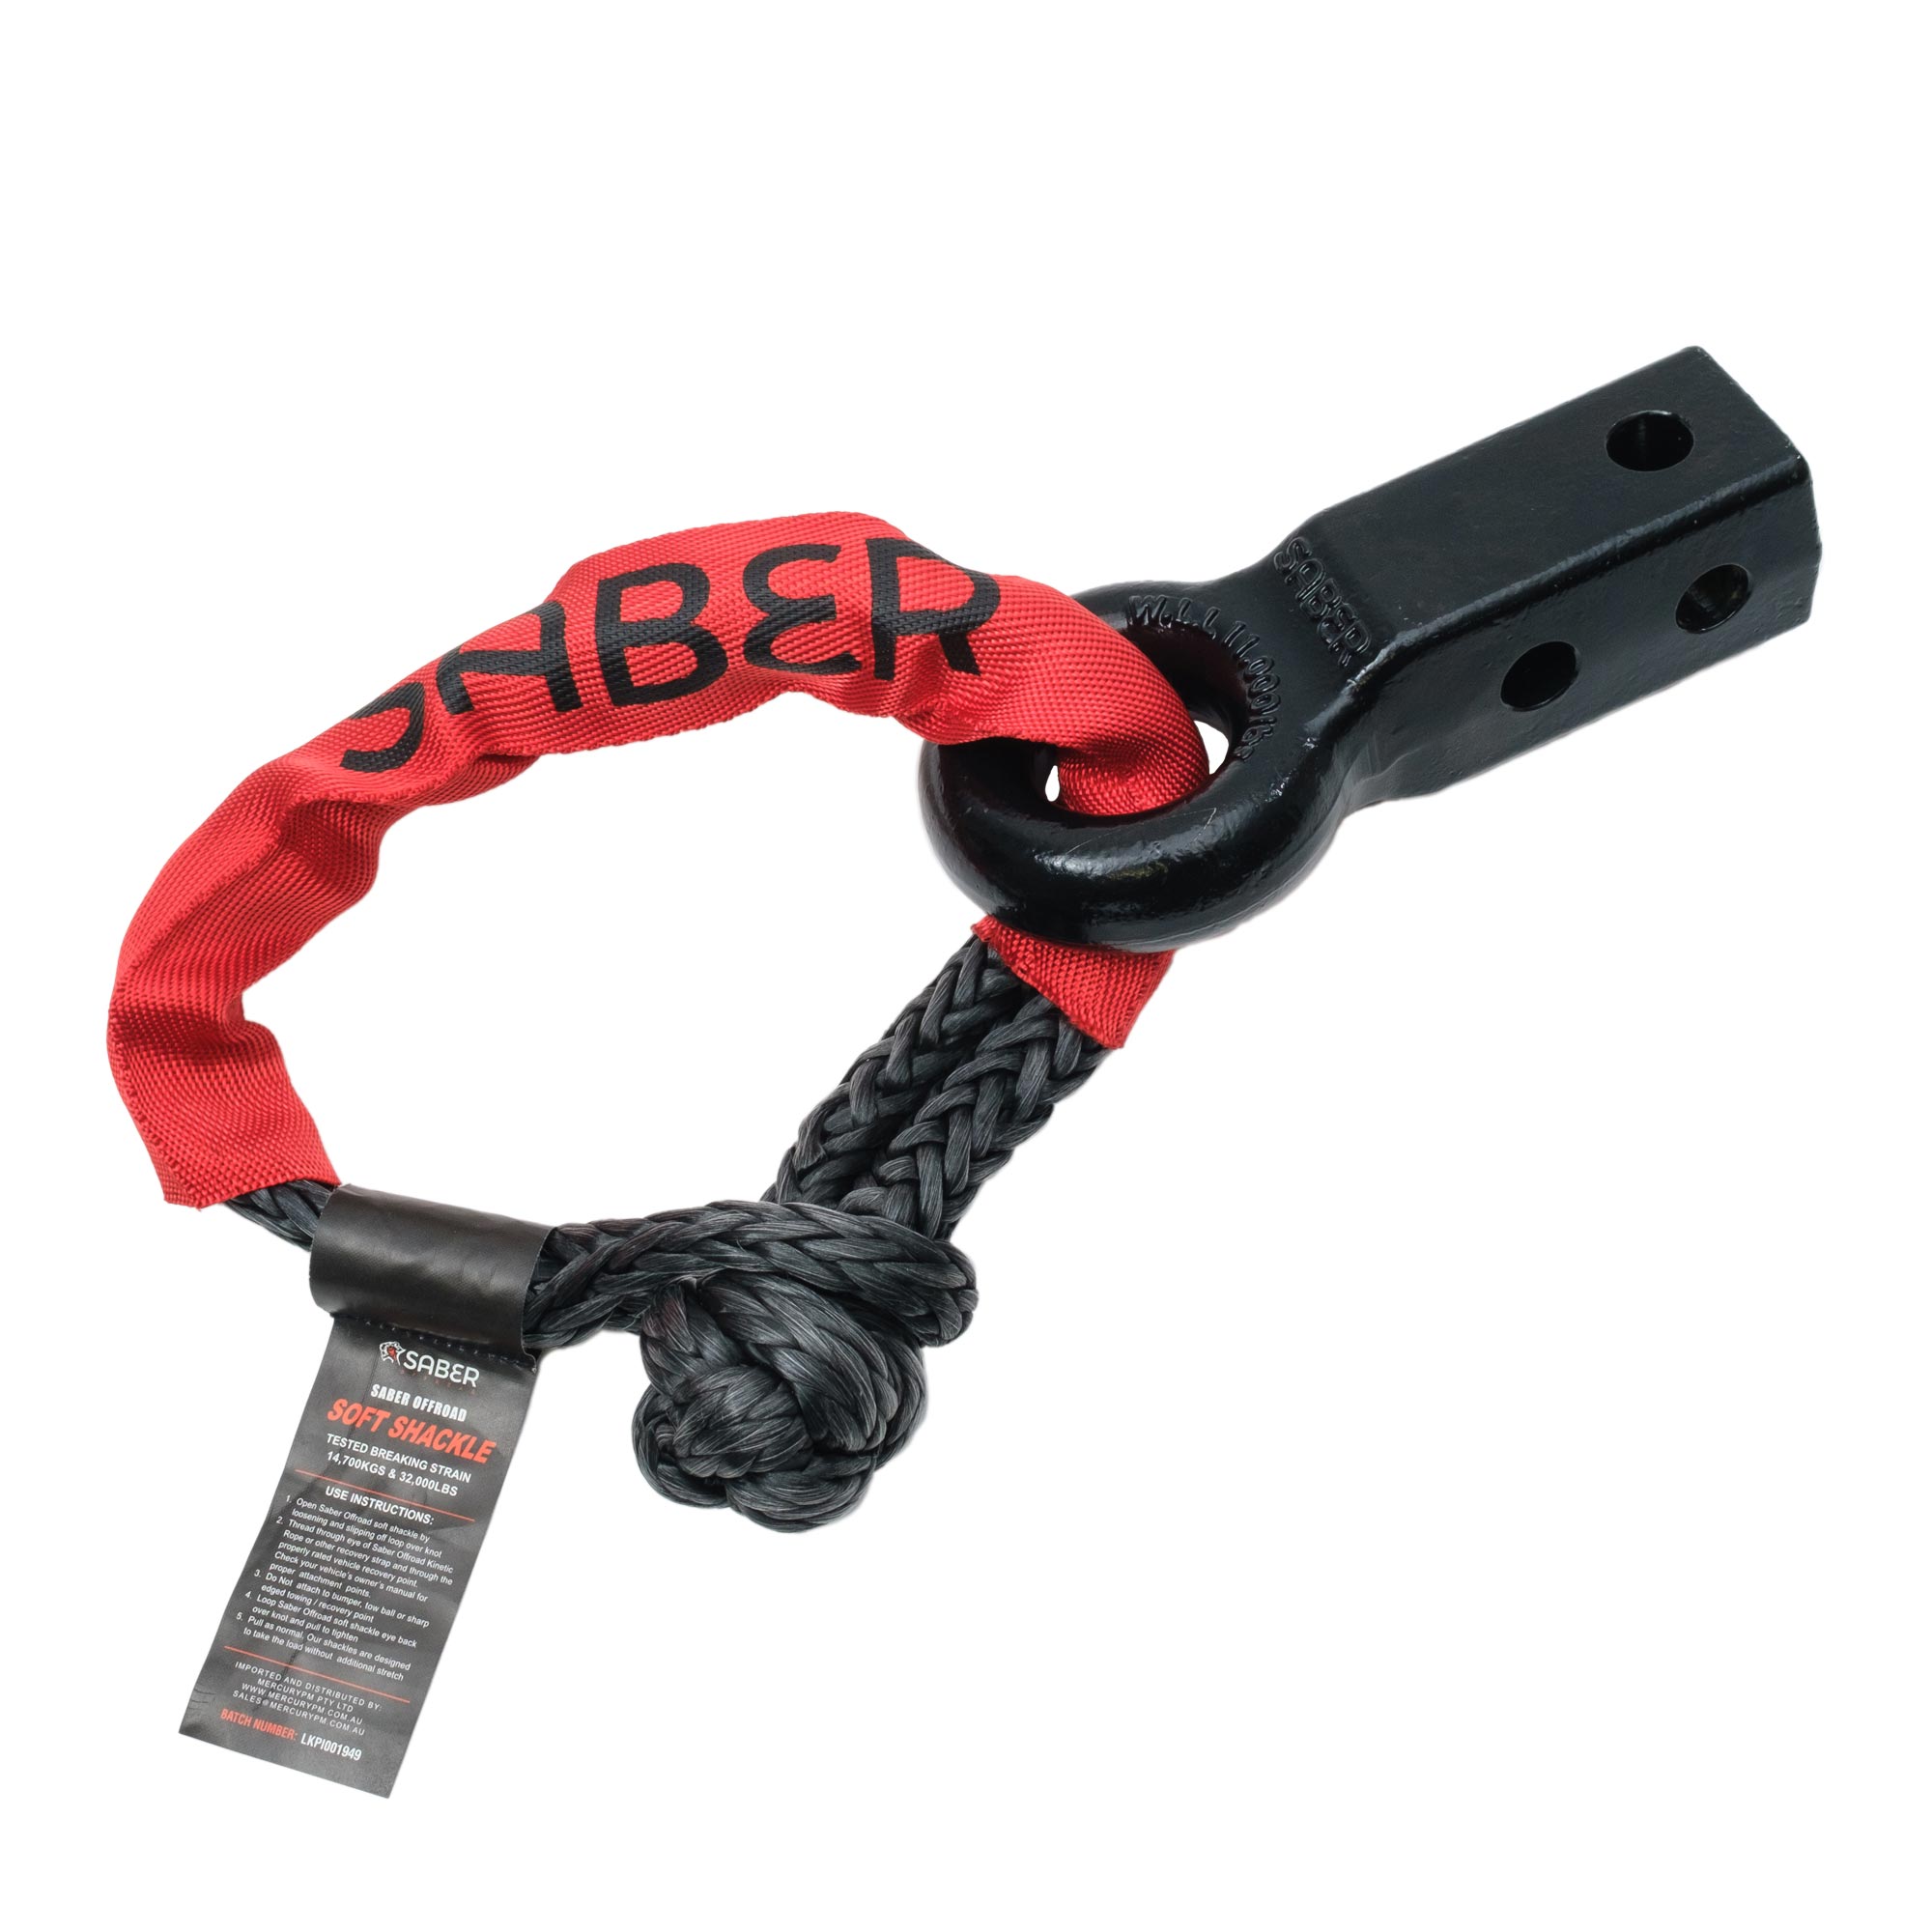 Saber Offroad Rear Recovery Hitch Steel 0779 2000px 1